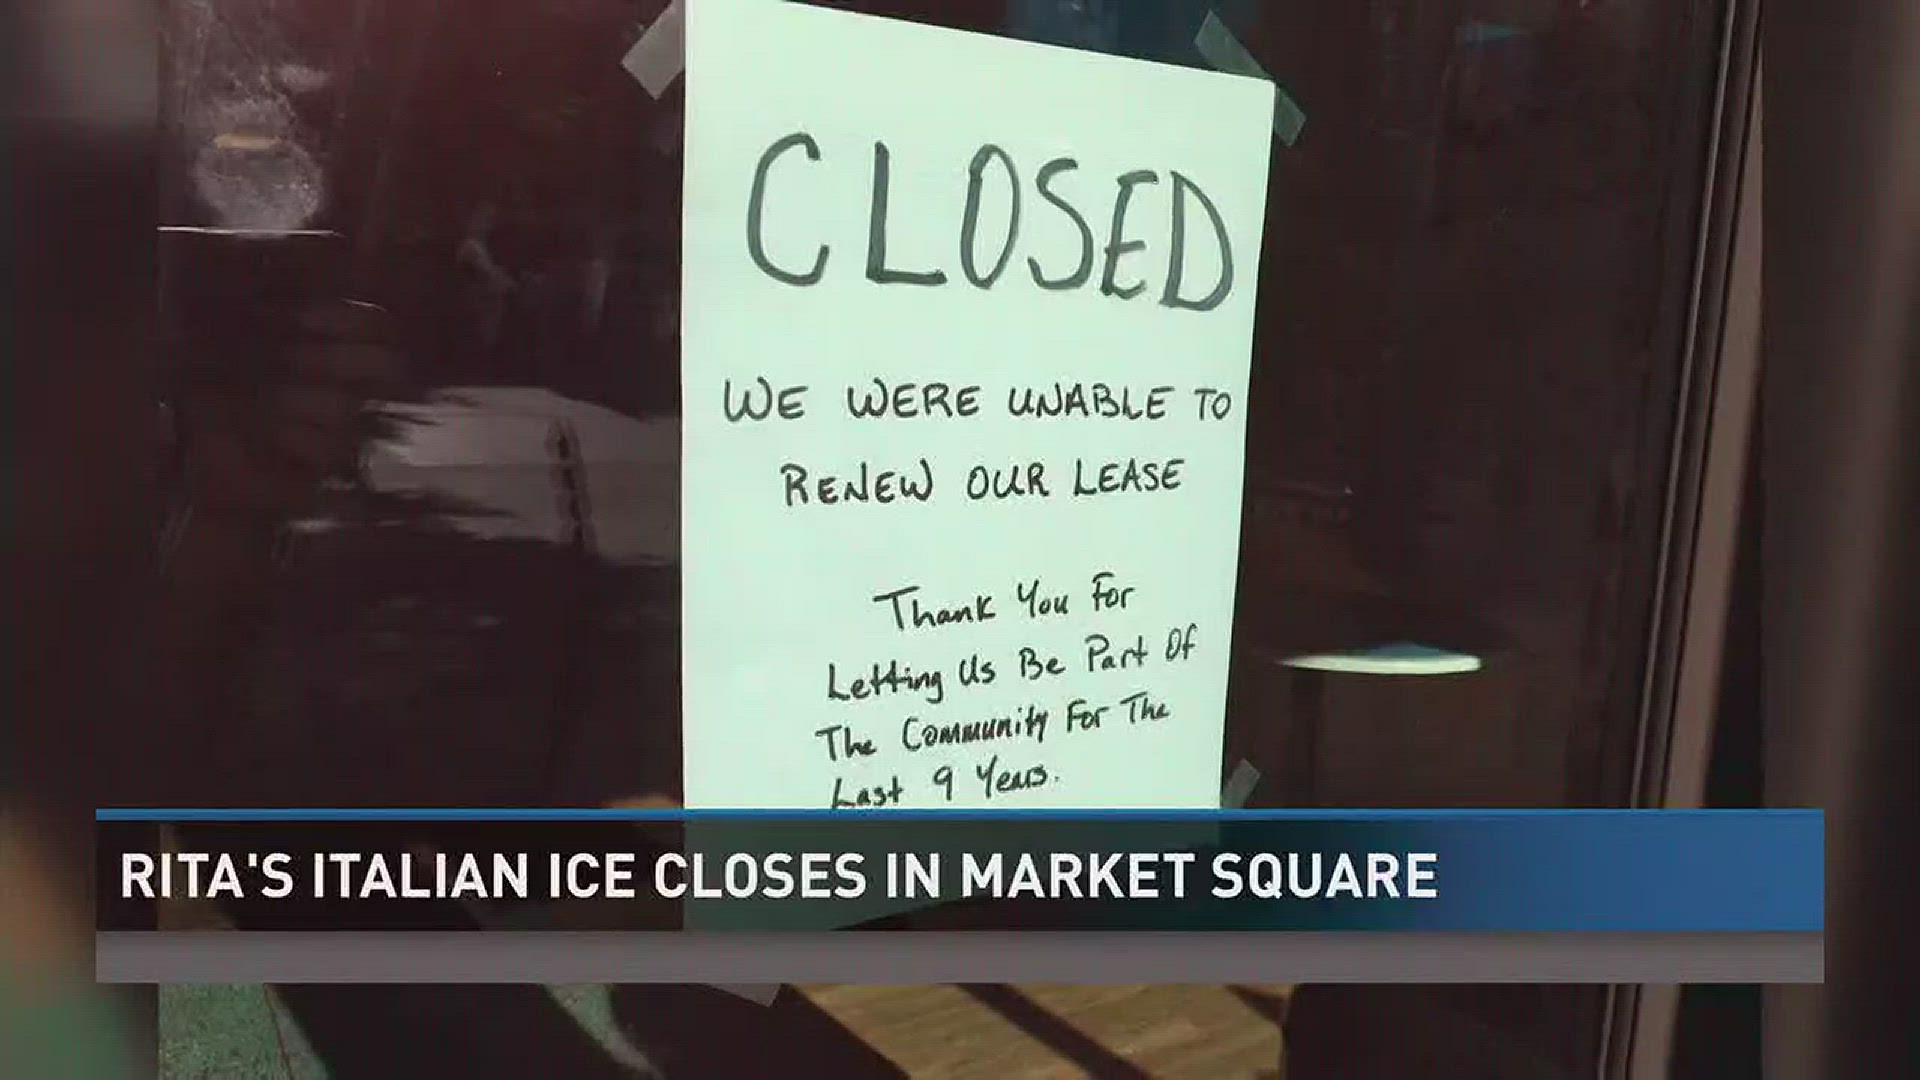 Oct. 19, 2017: A market square business is closed after 9 years of business.